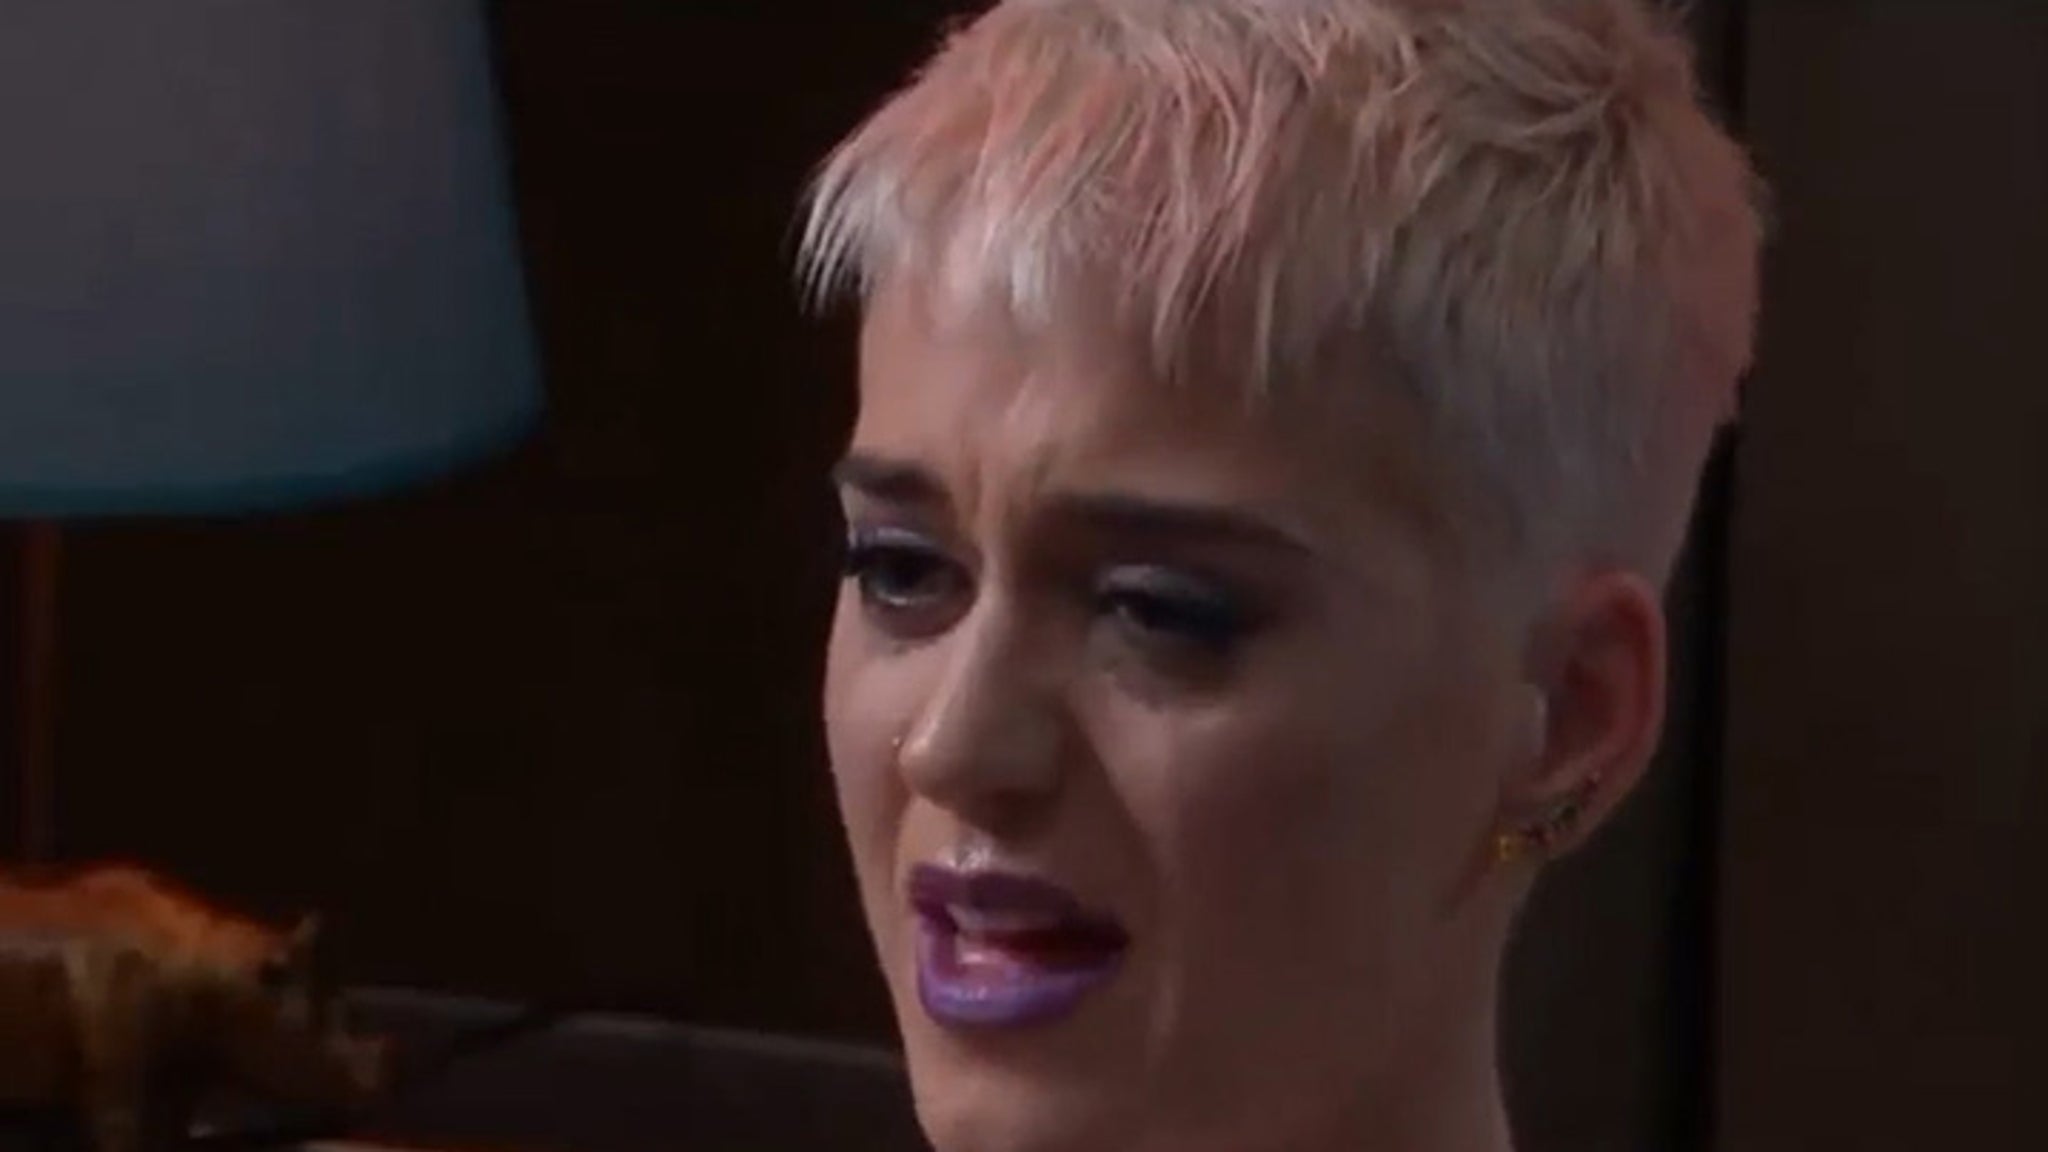 Katy Perry Breaks Down Crying Discussing Suicidal Thoughts And Love Woes